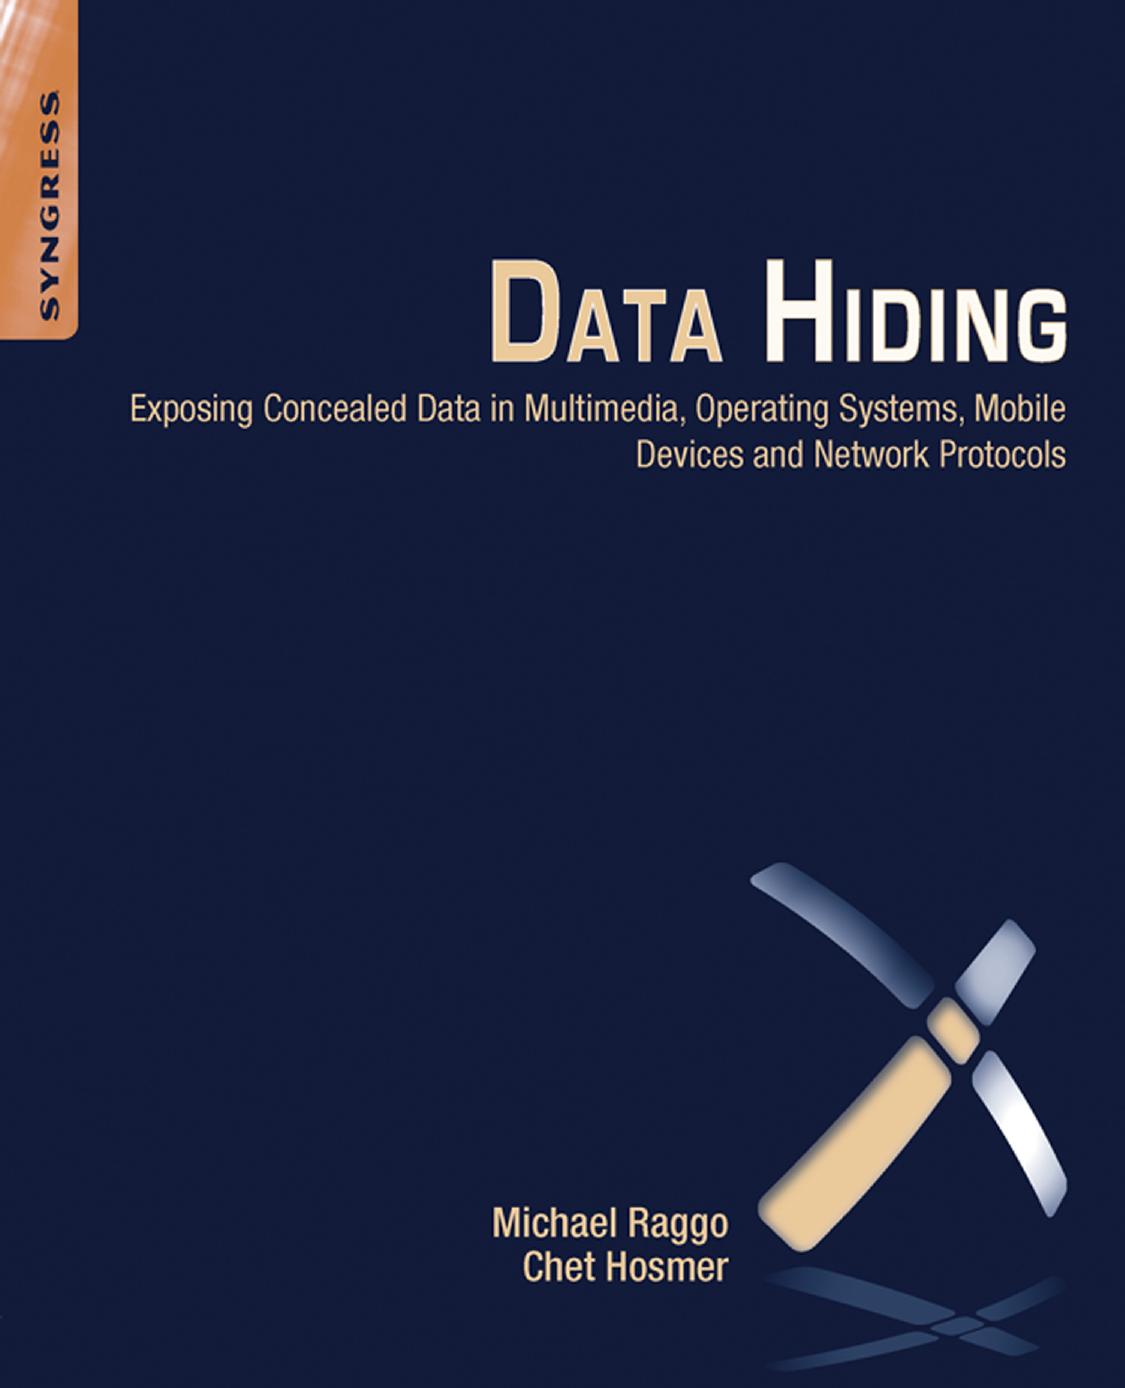 Data Hiding: Exposing Concealed Data in Multimedia, Operating Systems, Mobile Devices and Network Protocols